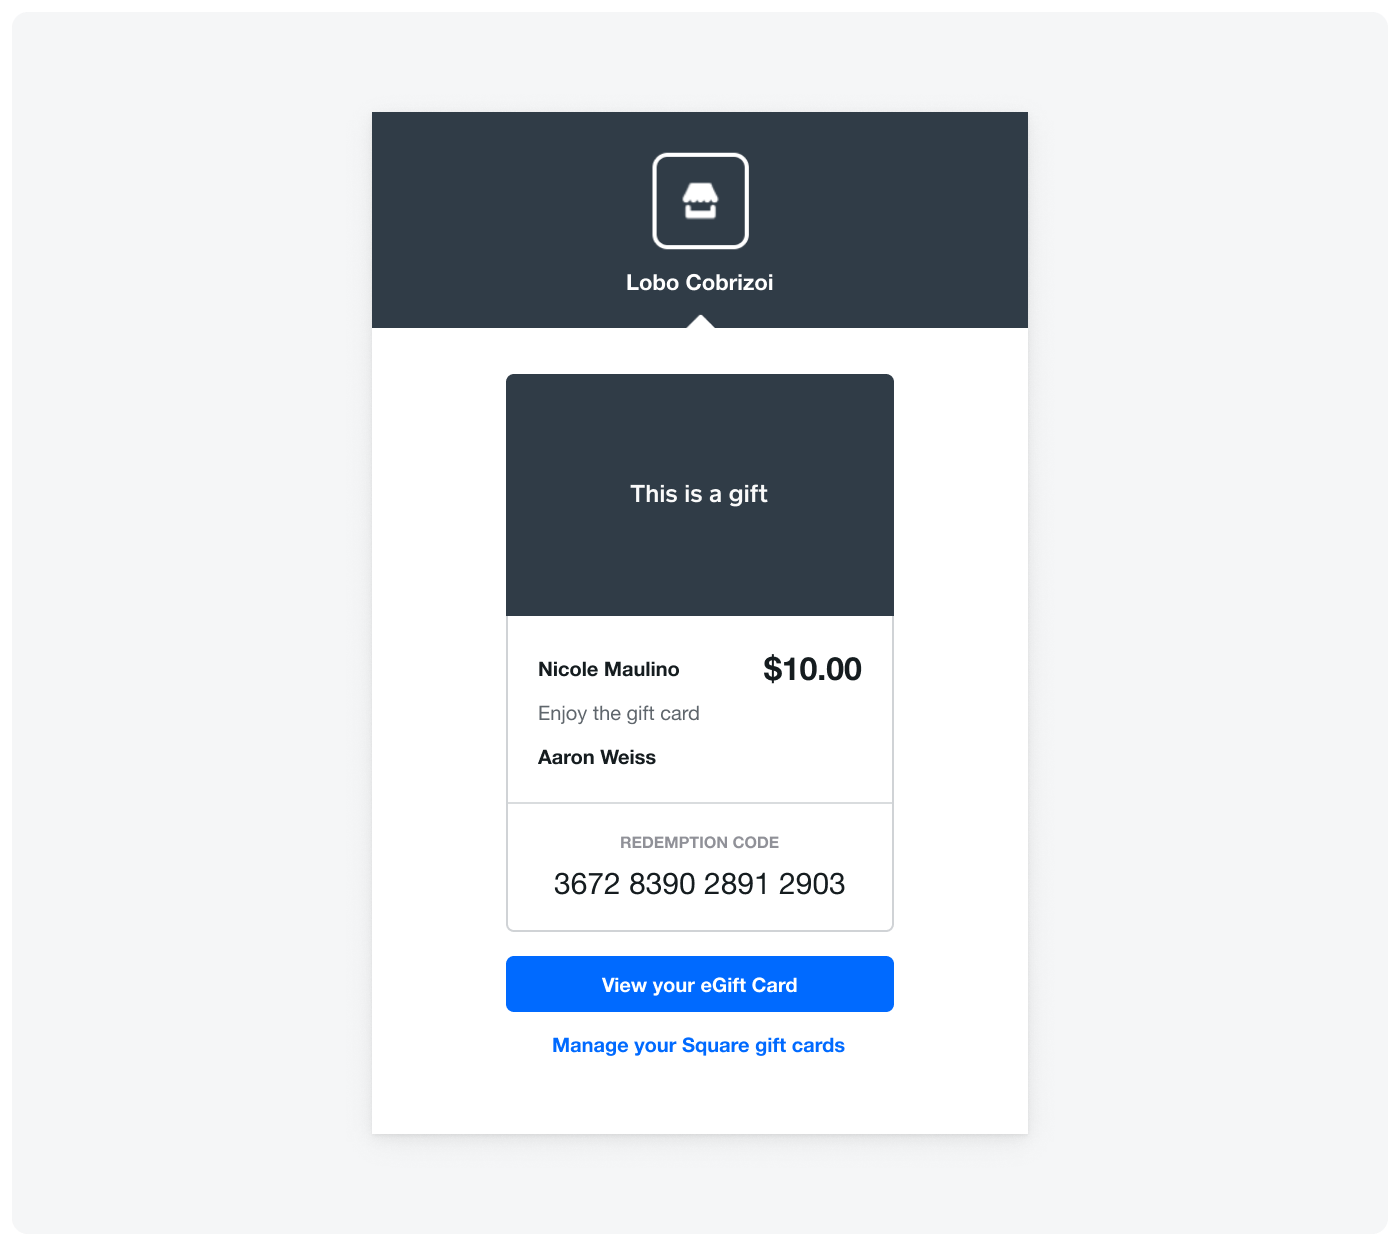 An example digital gift card that Square emails to customers, which includes the 16-digit redemption code that buyers use to make purchases with the gift card.